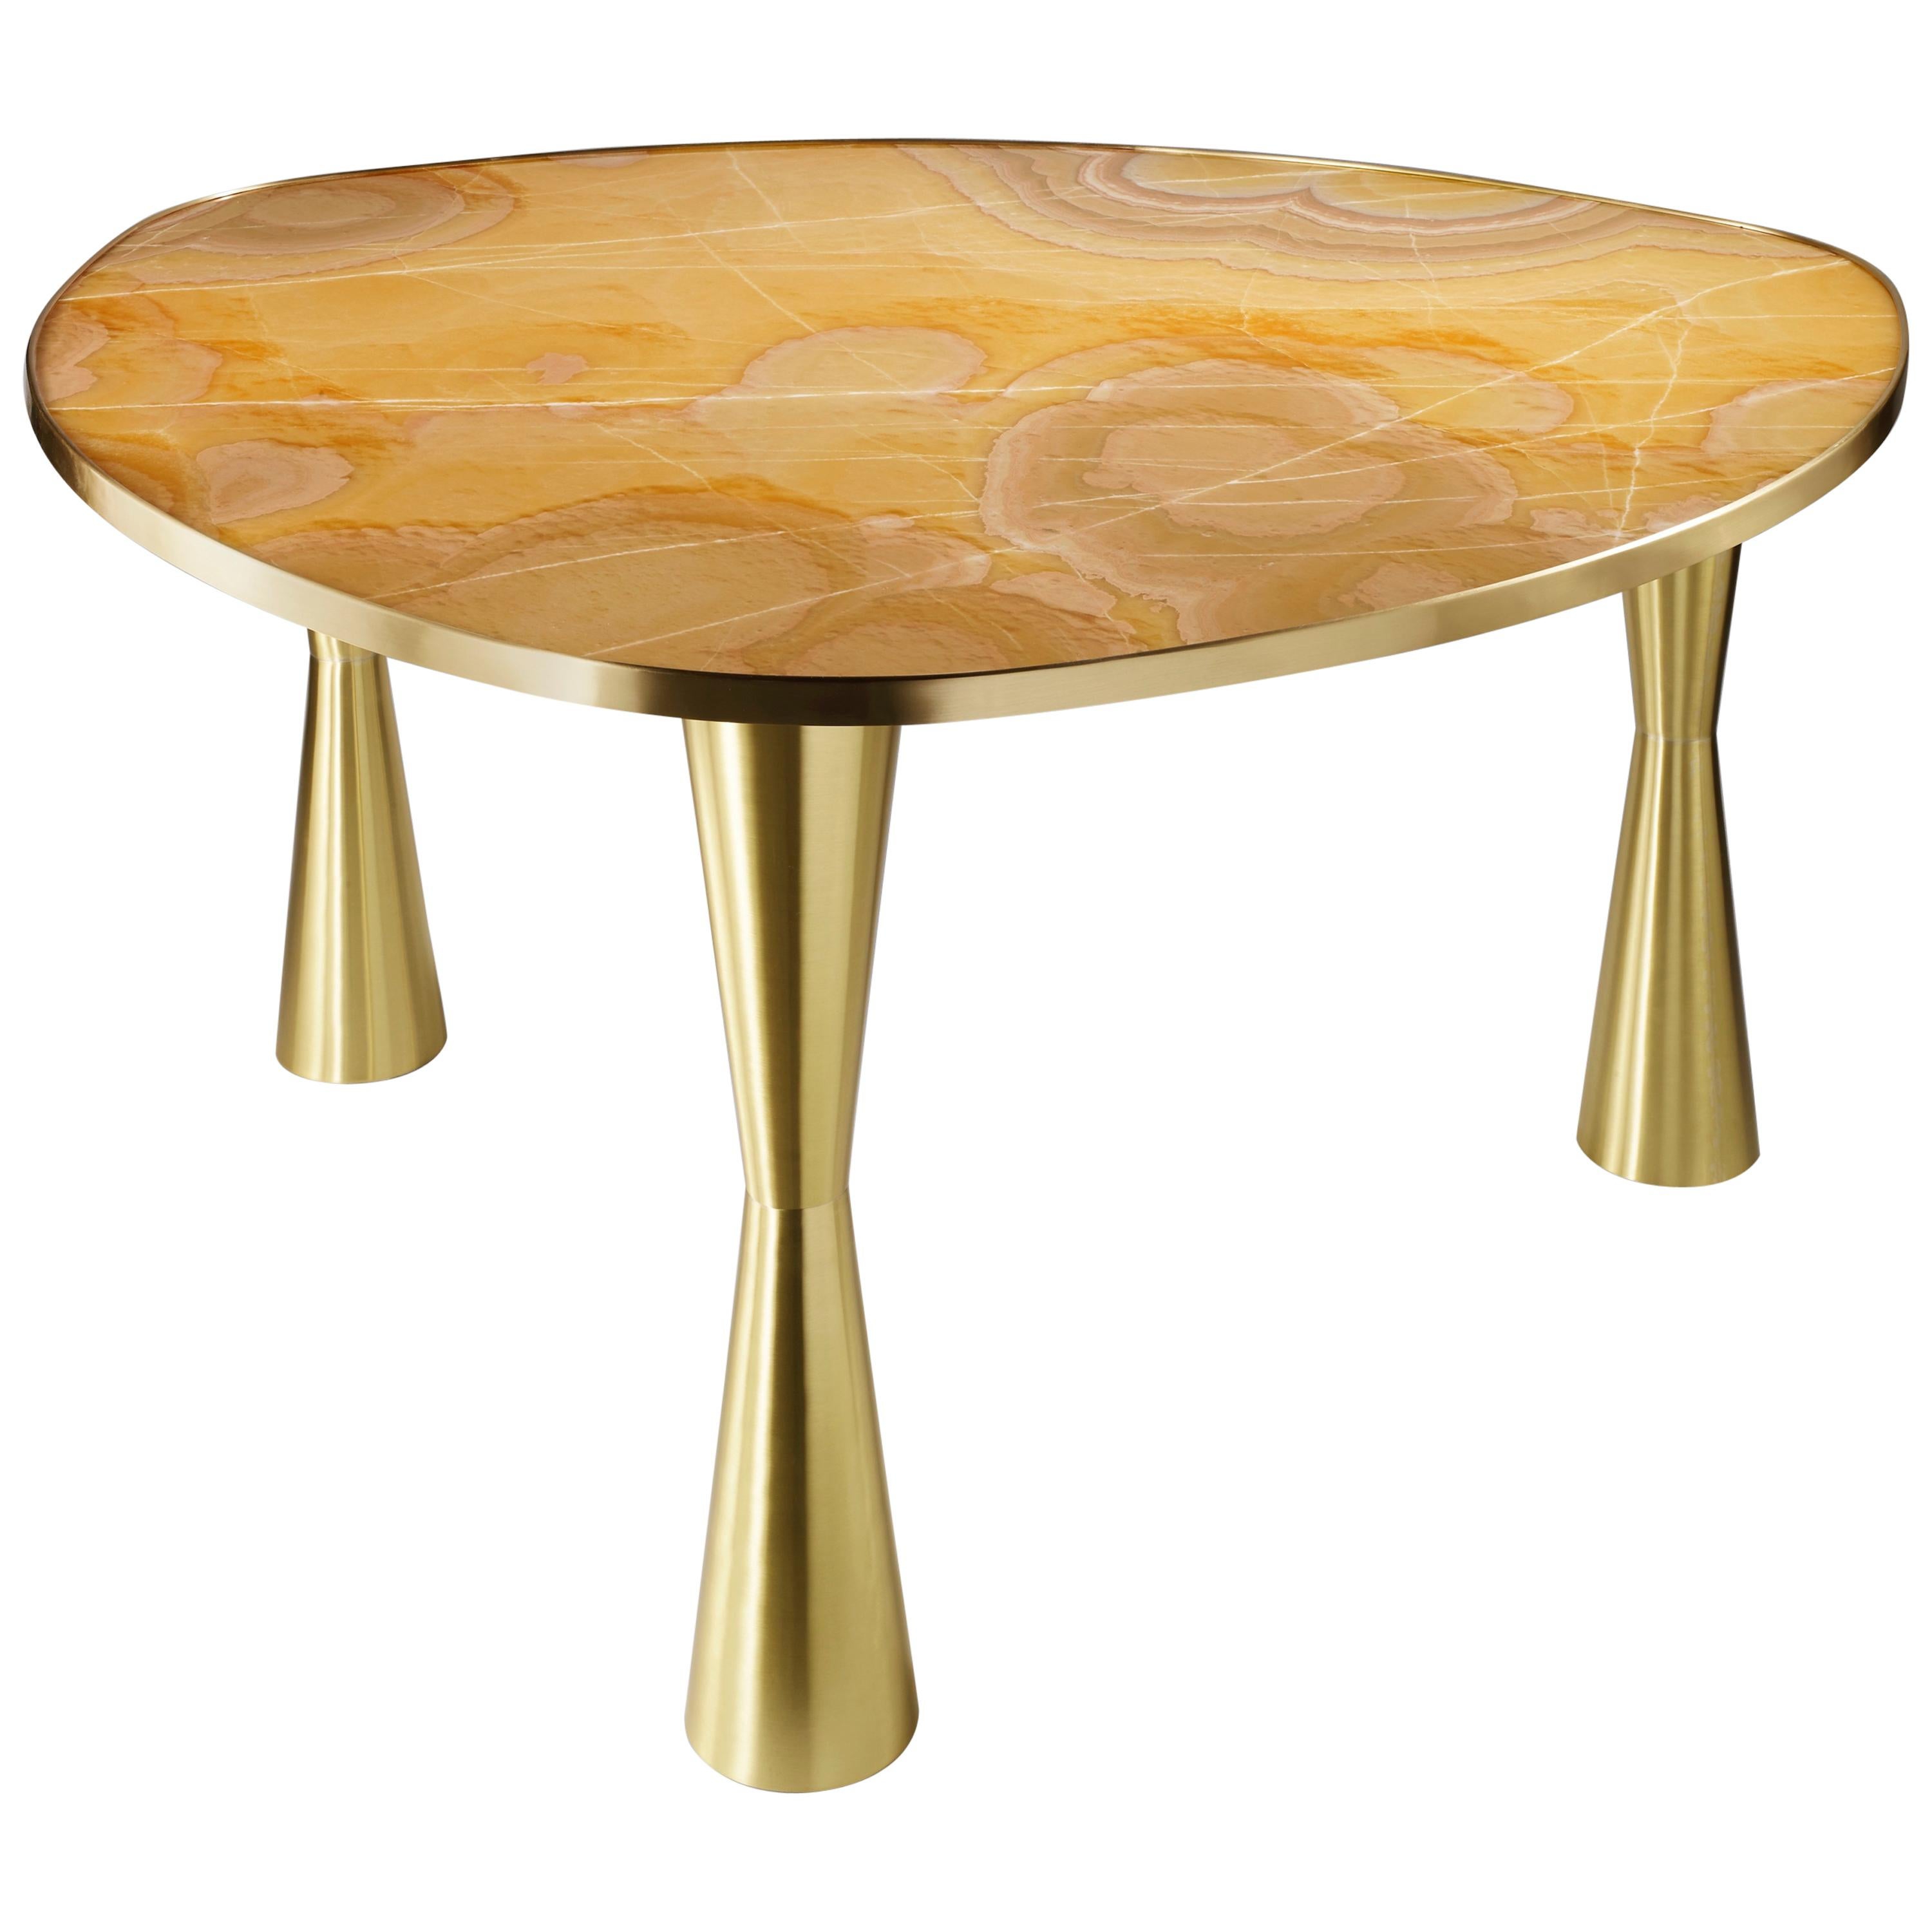 Contemporary Onyx Dining Table "Satellite" with Brass Base im Angebot